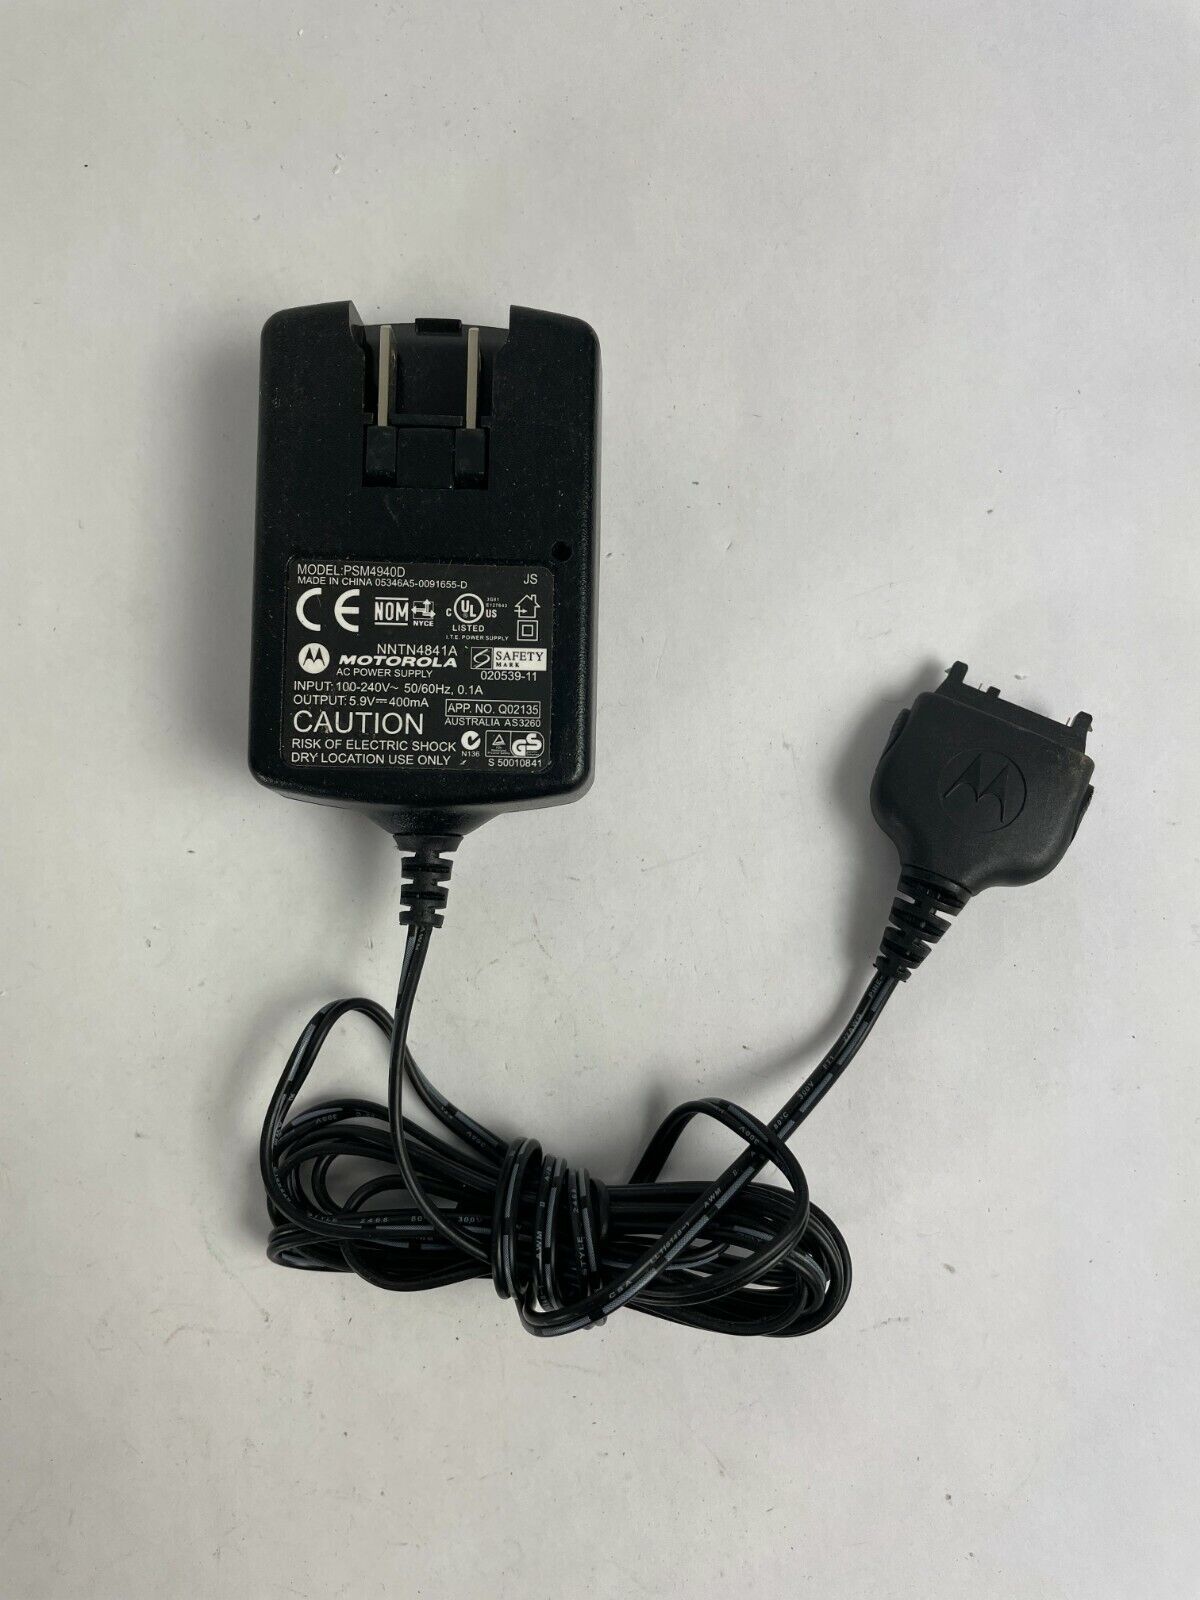 Genuine Motorola PSM4940D AC Adapter Output 5.9 V 400mA Power Supply Adapter A52